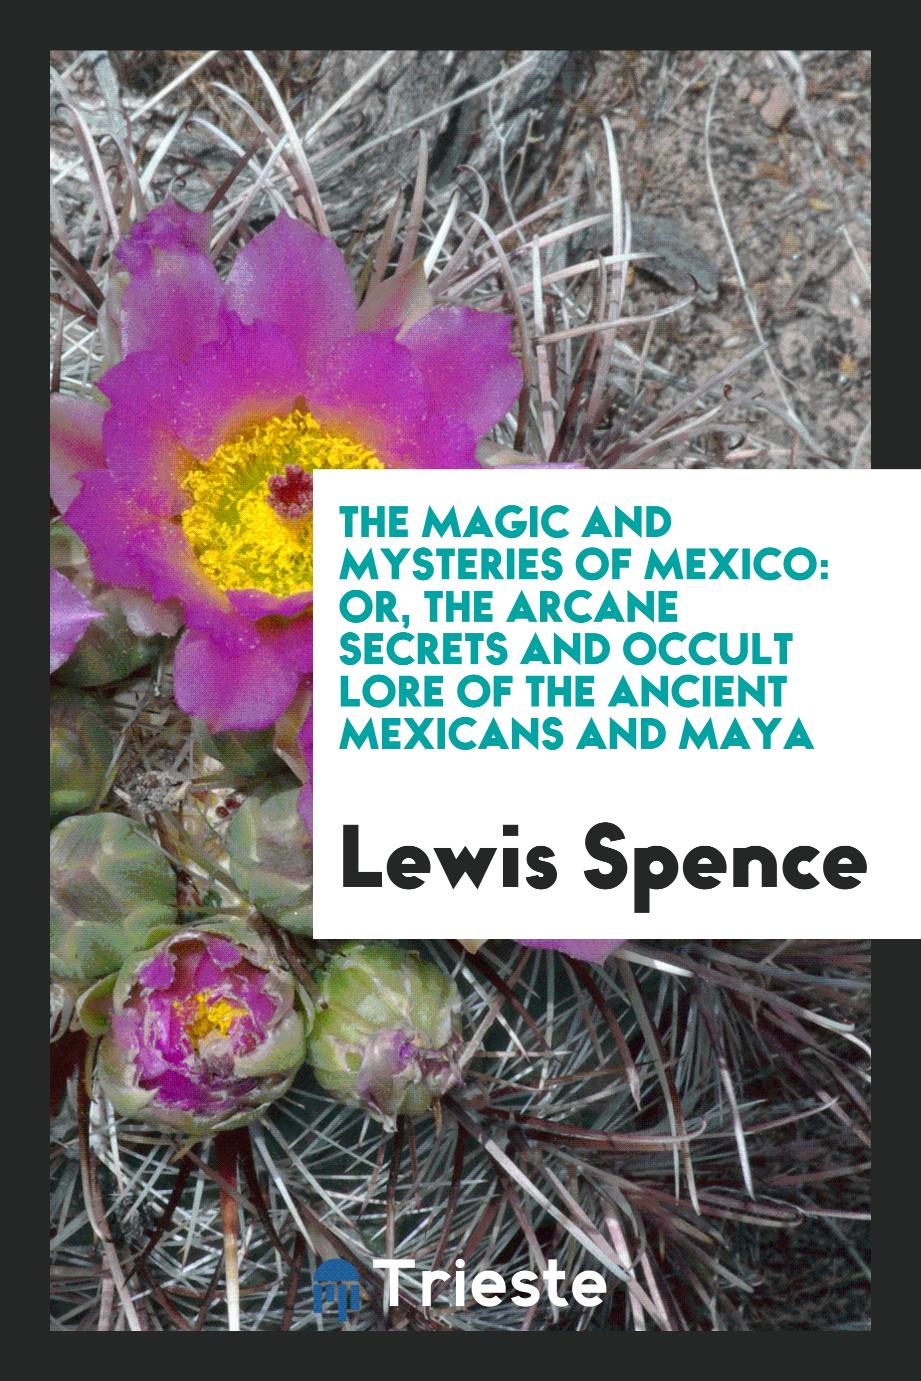 The Magic and Mysteries of Mexico: Or, the Arcane Secrets and Occult Lore of the Ancient Mexicans and Maya